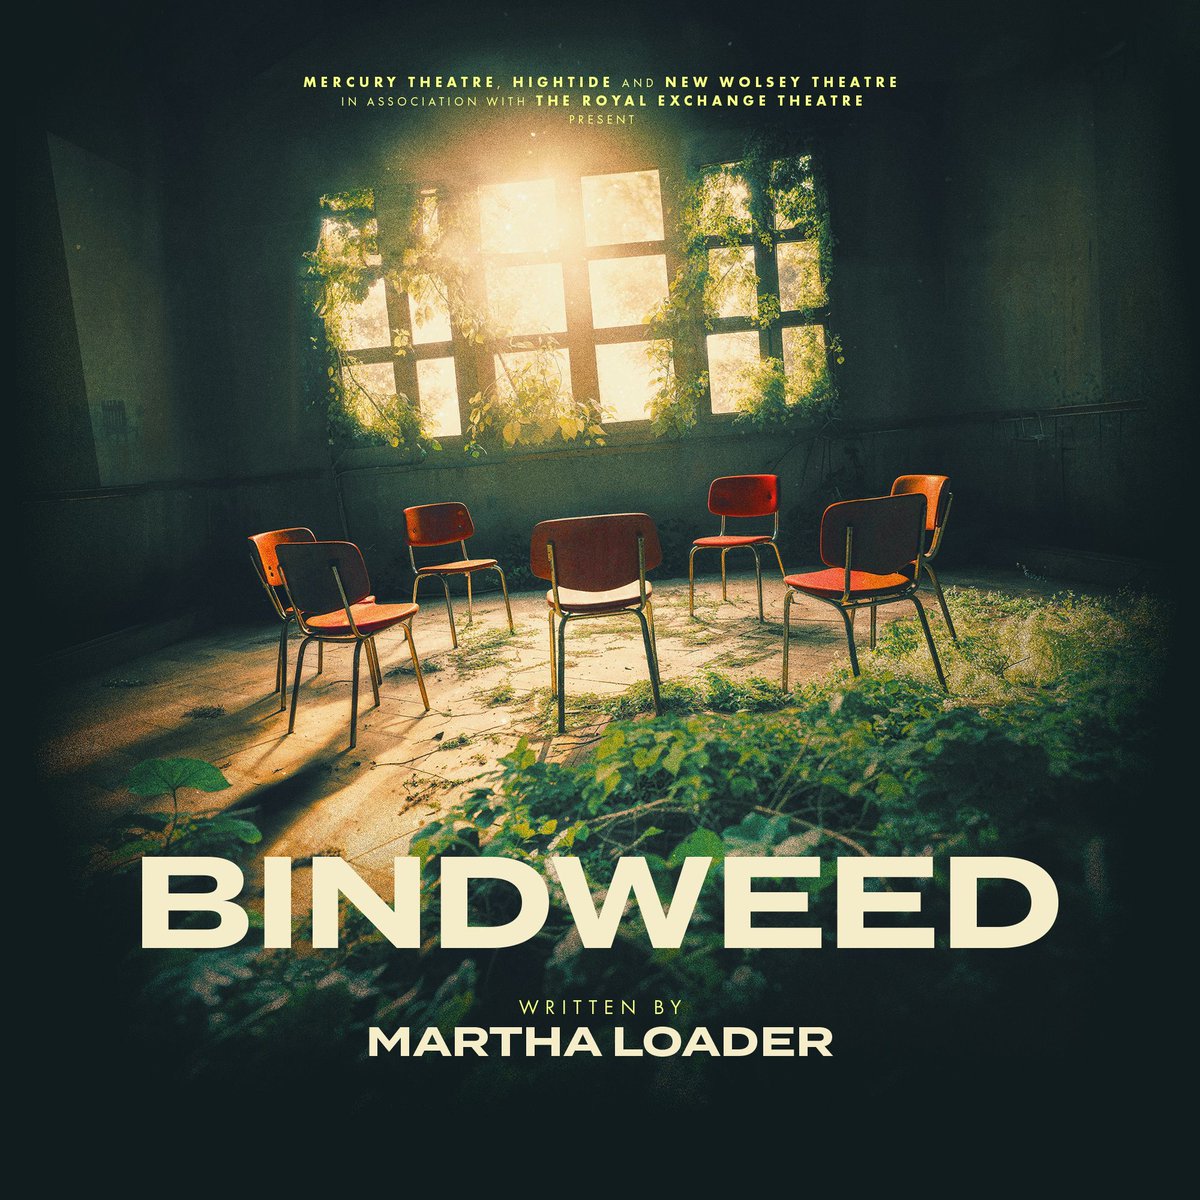 Written in Ipswich, set in Colchester, and featuring a predominantly East-based cast, Bindweed showcases the best of local creativity. Join us for our next Mercury Original from Thu 13 - Sat 22 Jun and support new local writing. Secure your tickets today: buff.ly/4bQzaml